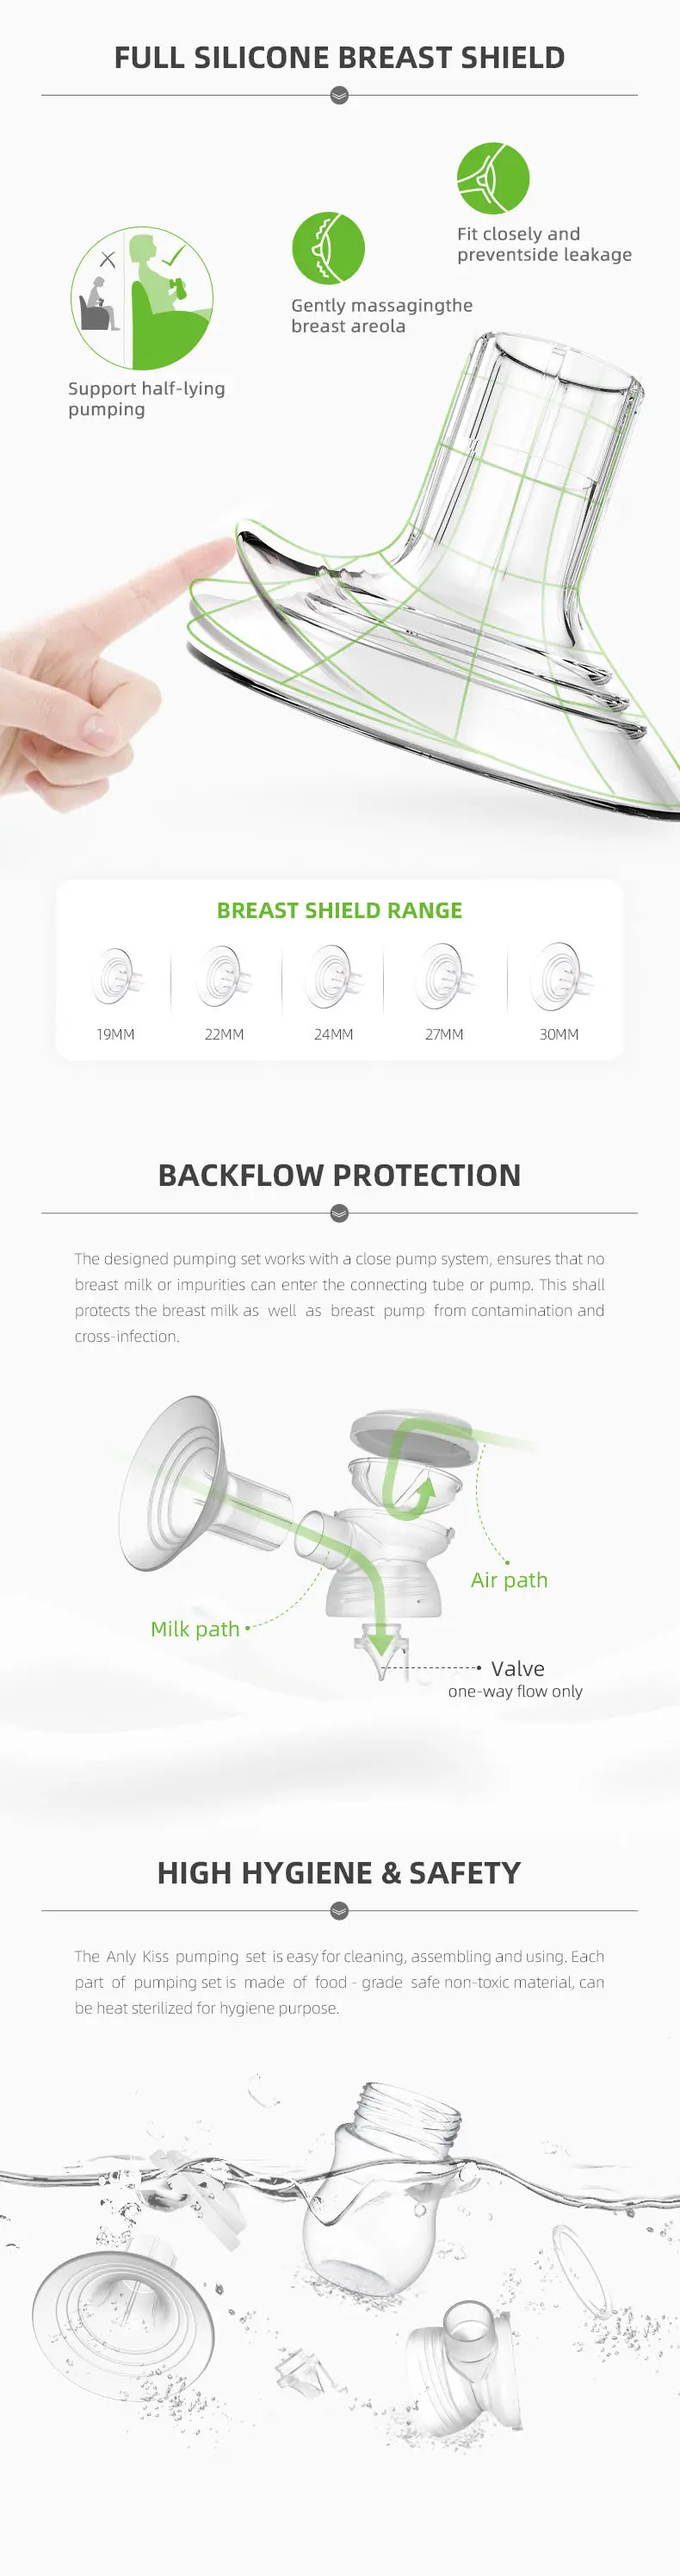 Anly Kiss Large Suction Bilateral Breast Pump Portable Adjustable Painless Electric Smart Breastpump For Breastfeeding Mom elvie single electric breast pump